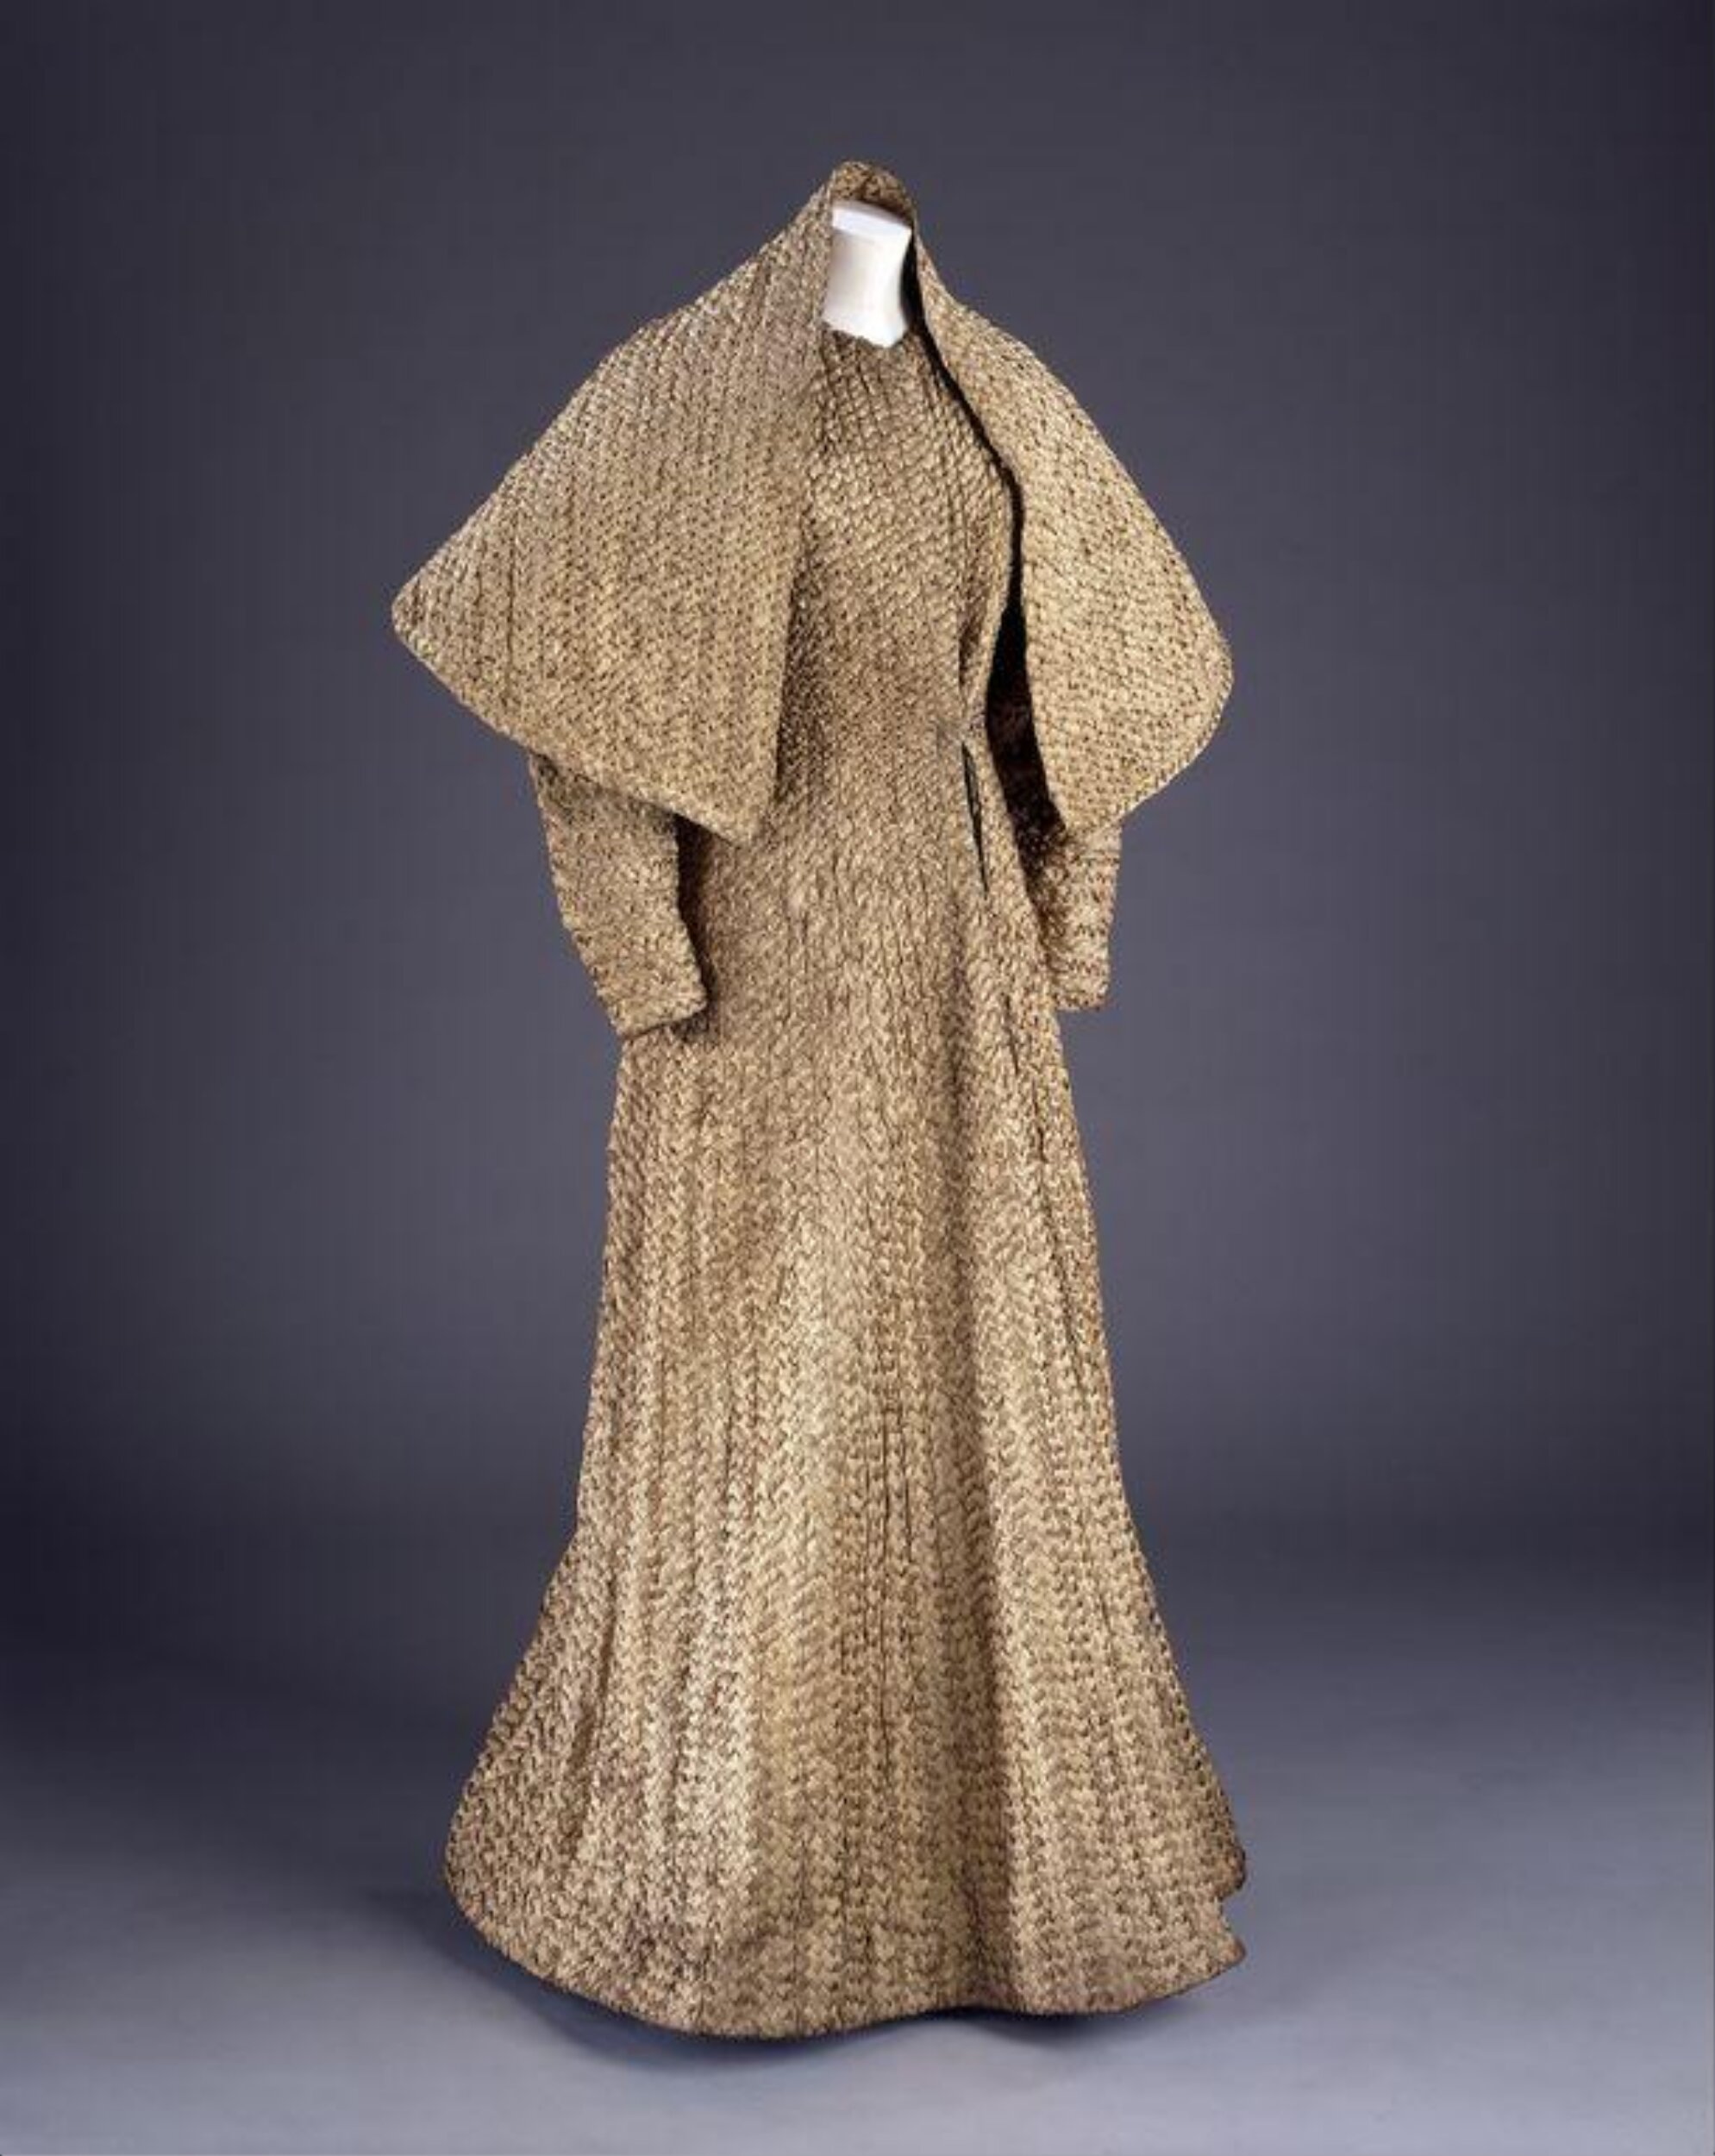 Art deco fashion: dresses and gowns - Recollections Blog